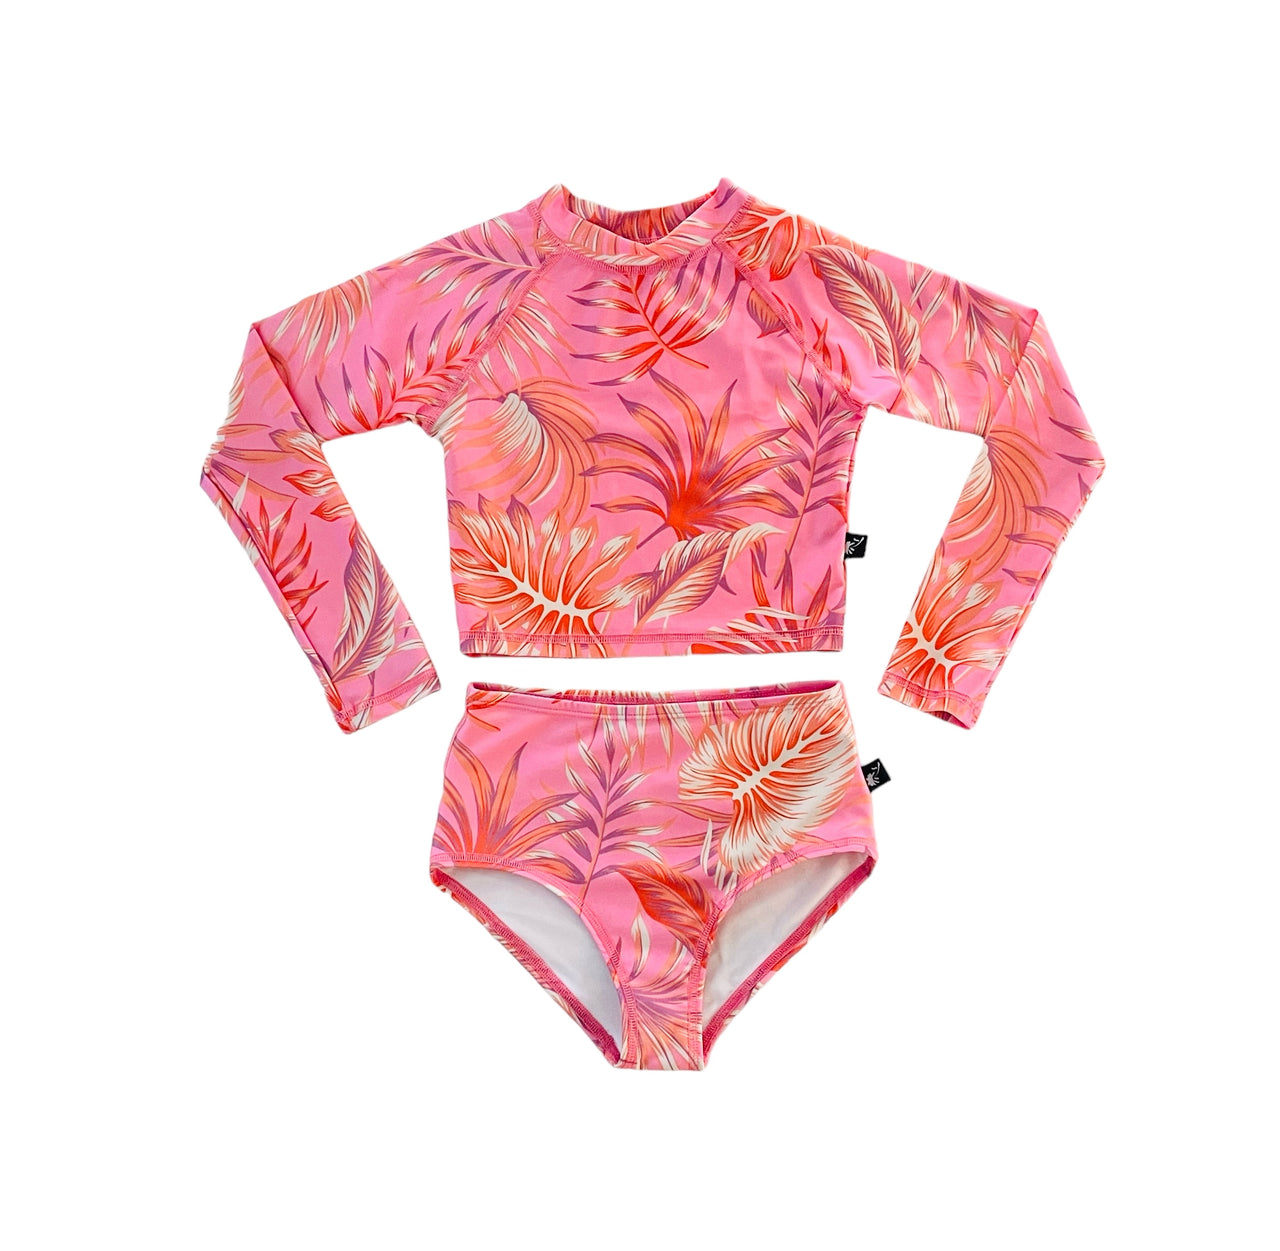 Girls Two Piece SHRED Suit